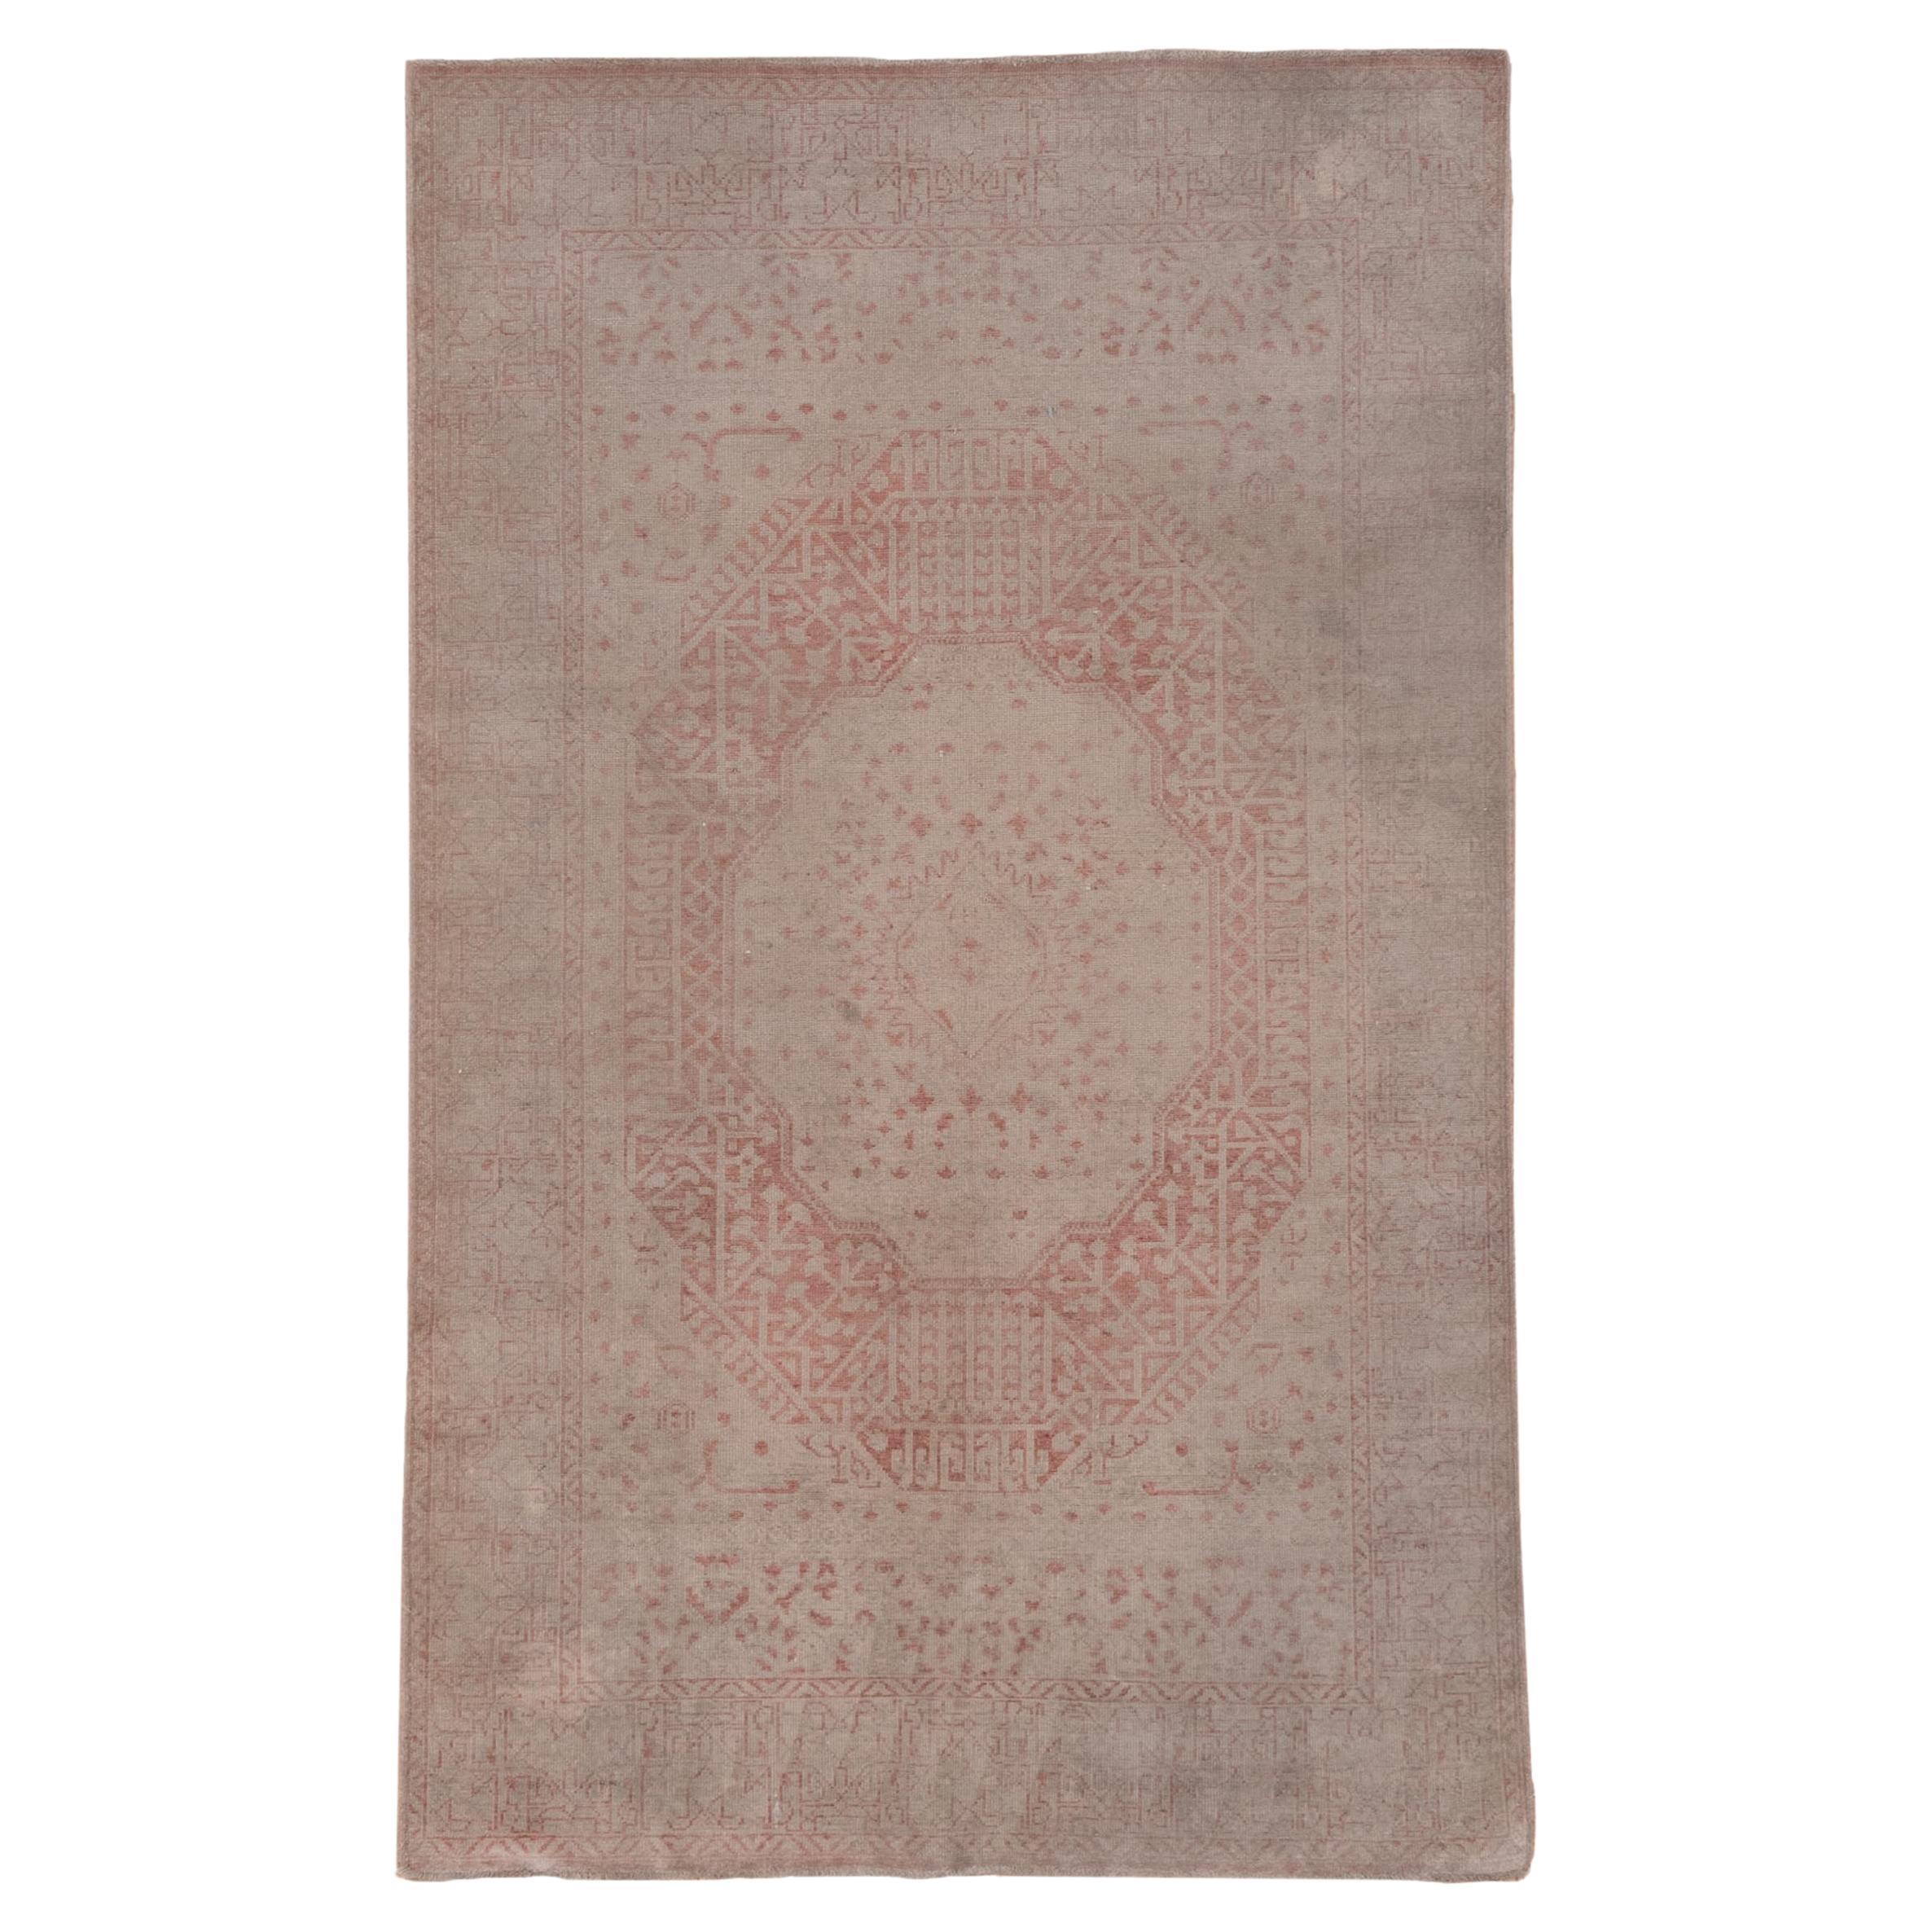 Sivas Antique Faded Central Medallion in Salmon Pinks and Soft Oranges For Sale